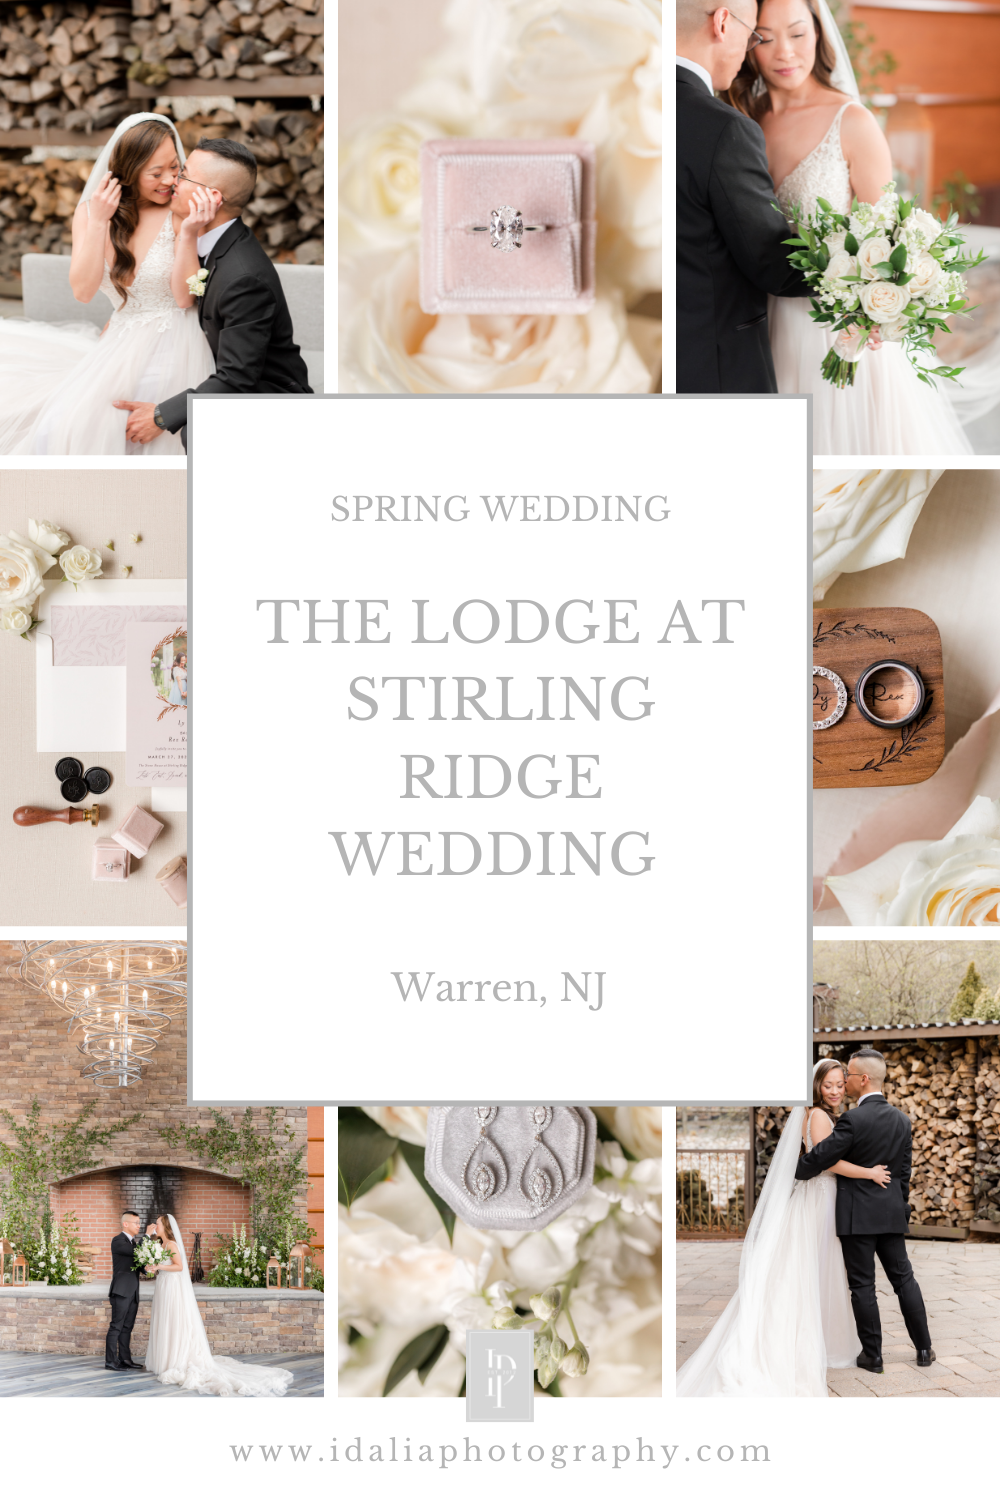 The Lodge at Stirling Ridge wedding in Warren NJ photographed by Idalia Photography